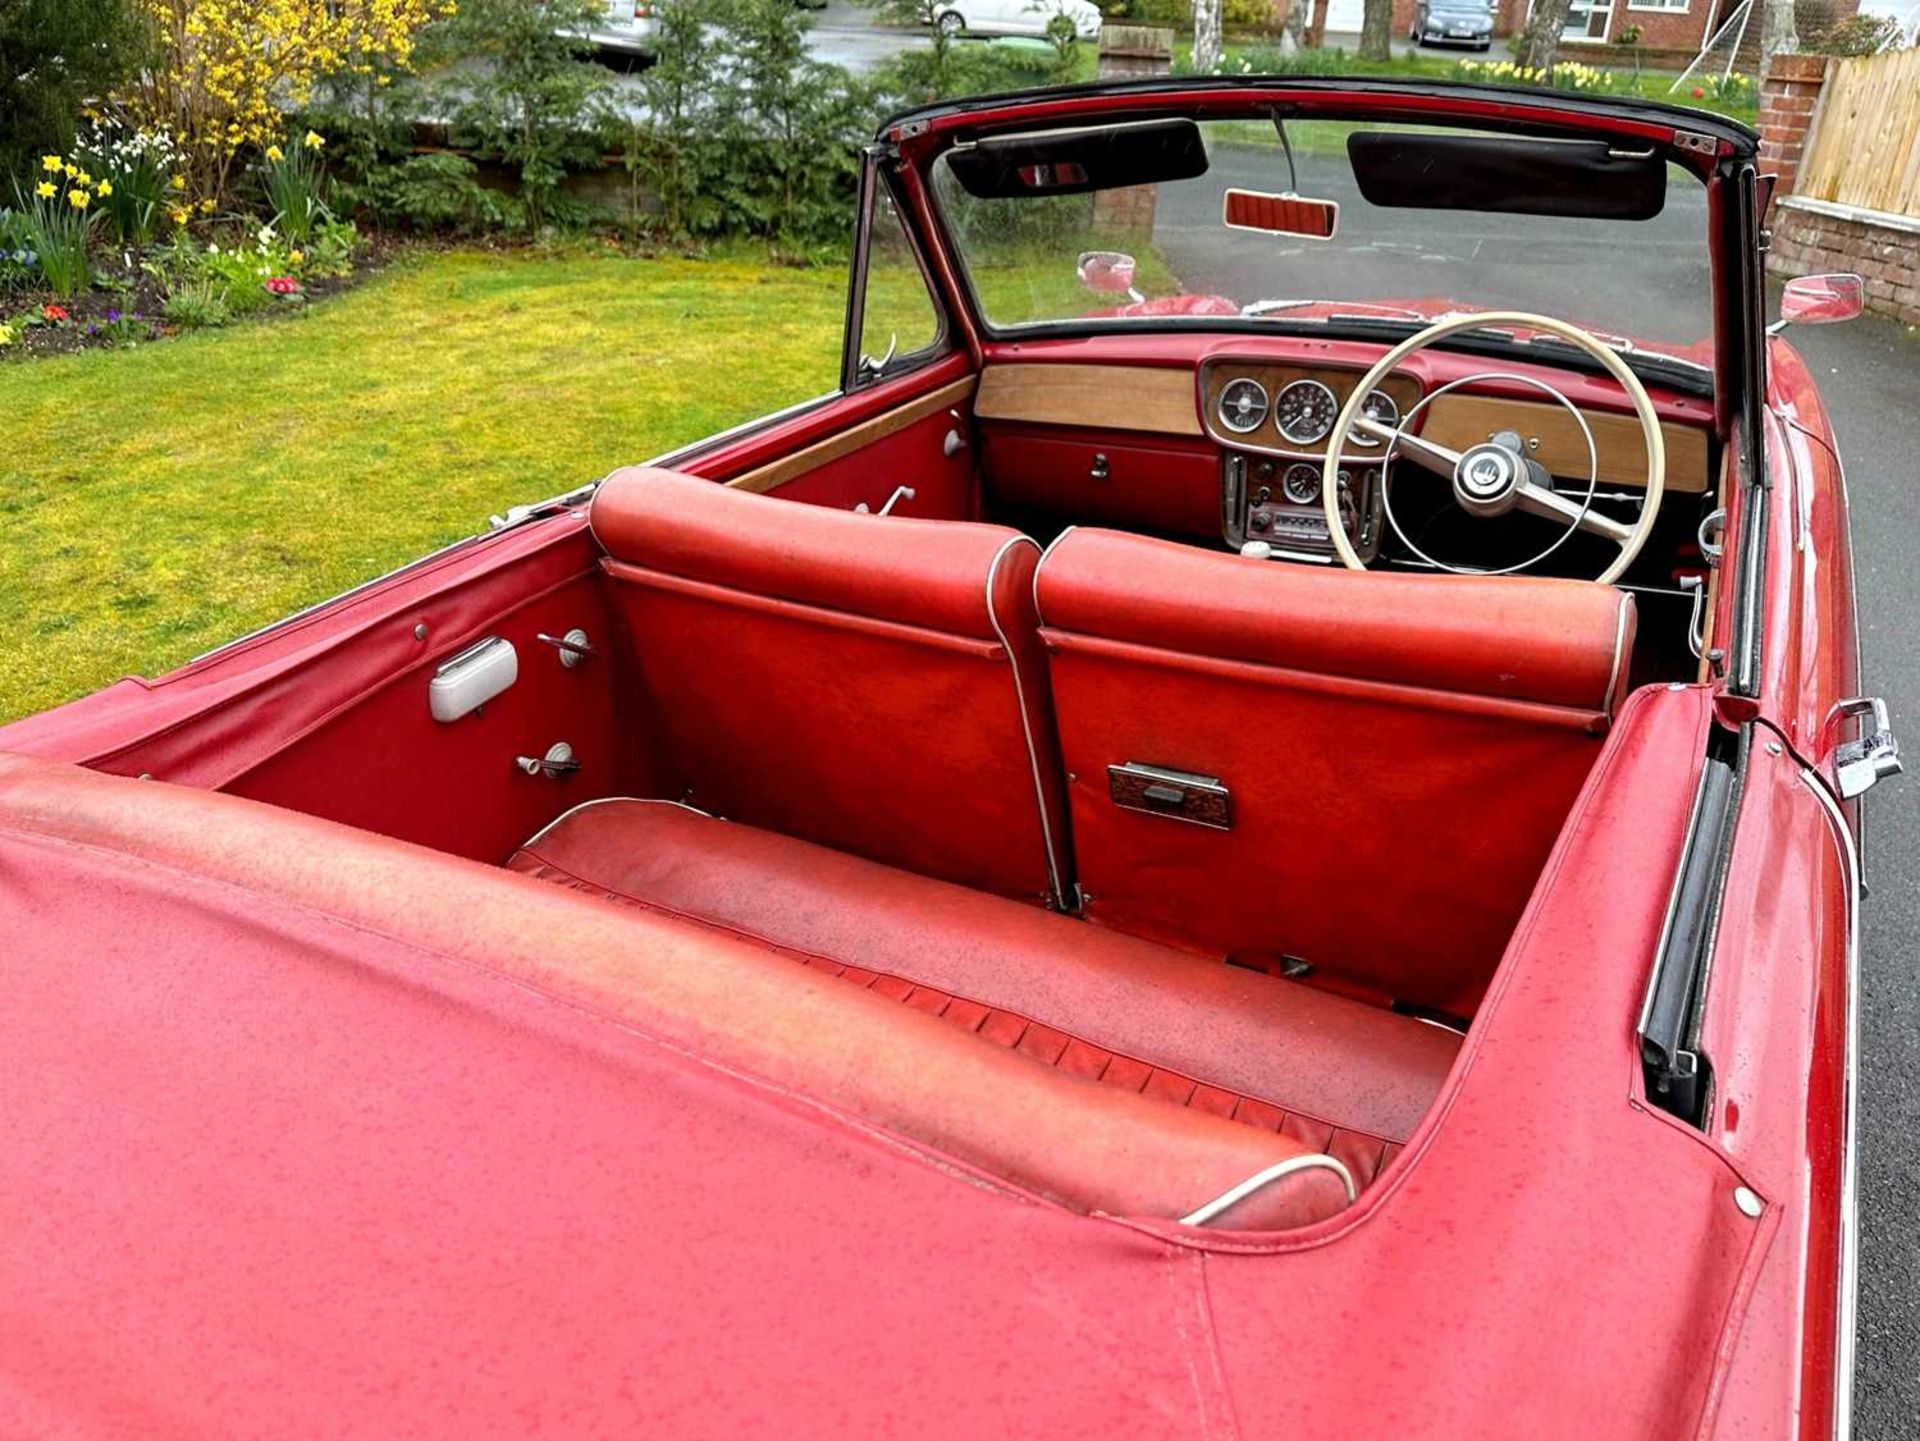 1961 Singer Gazelle Convertible Comes complete with overdrive, period radio and badge bar - Bild 41 aus 95